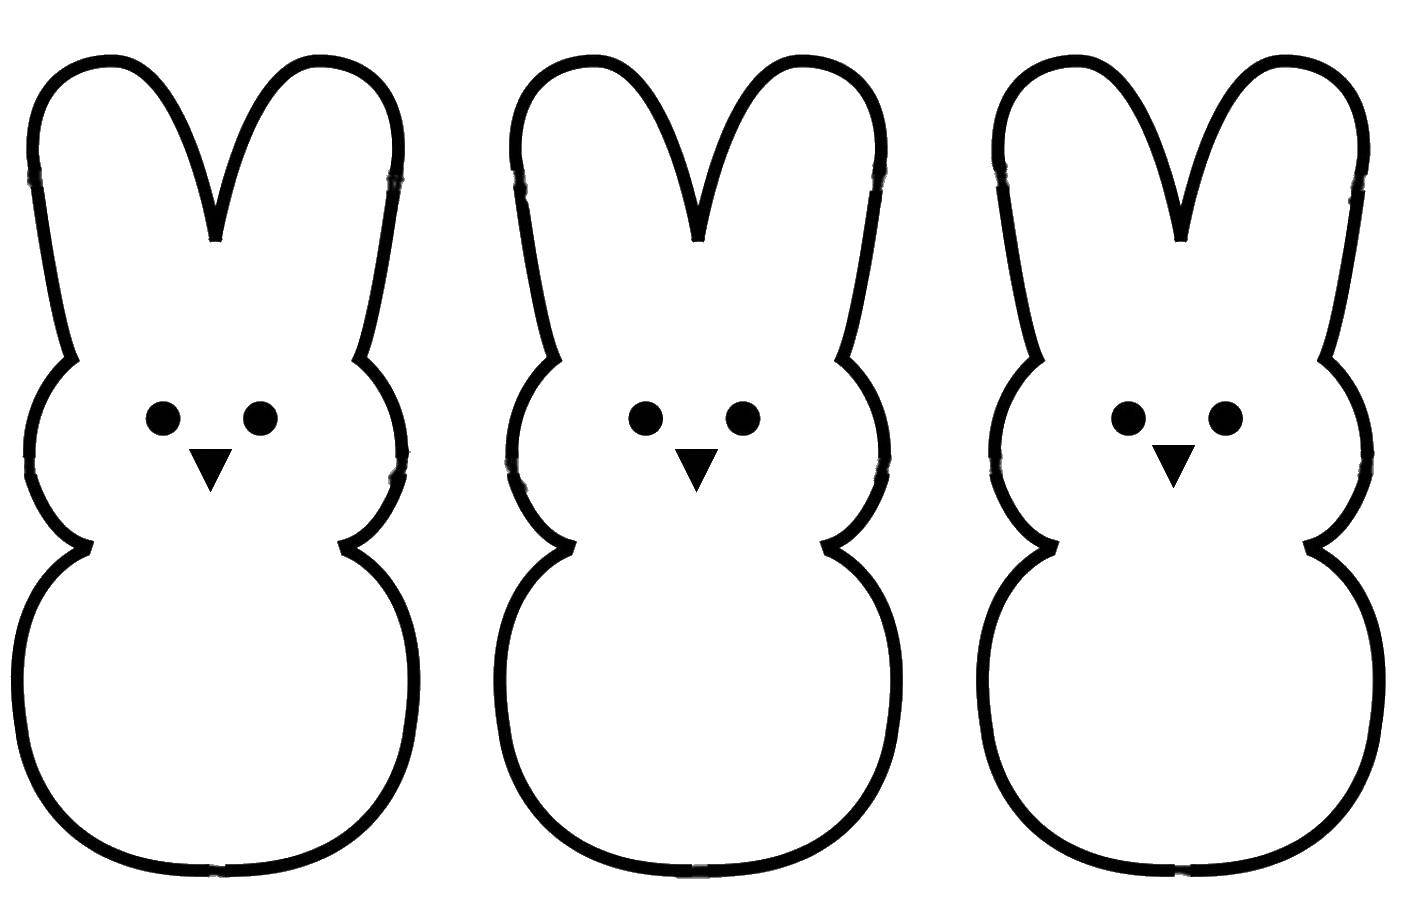 Coloring Bunny. Category The contour of the hare to cut. Tags:  the contours, bunnies, rabbits.